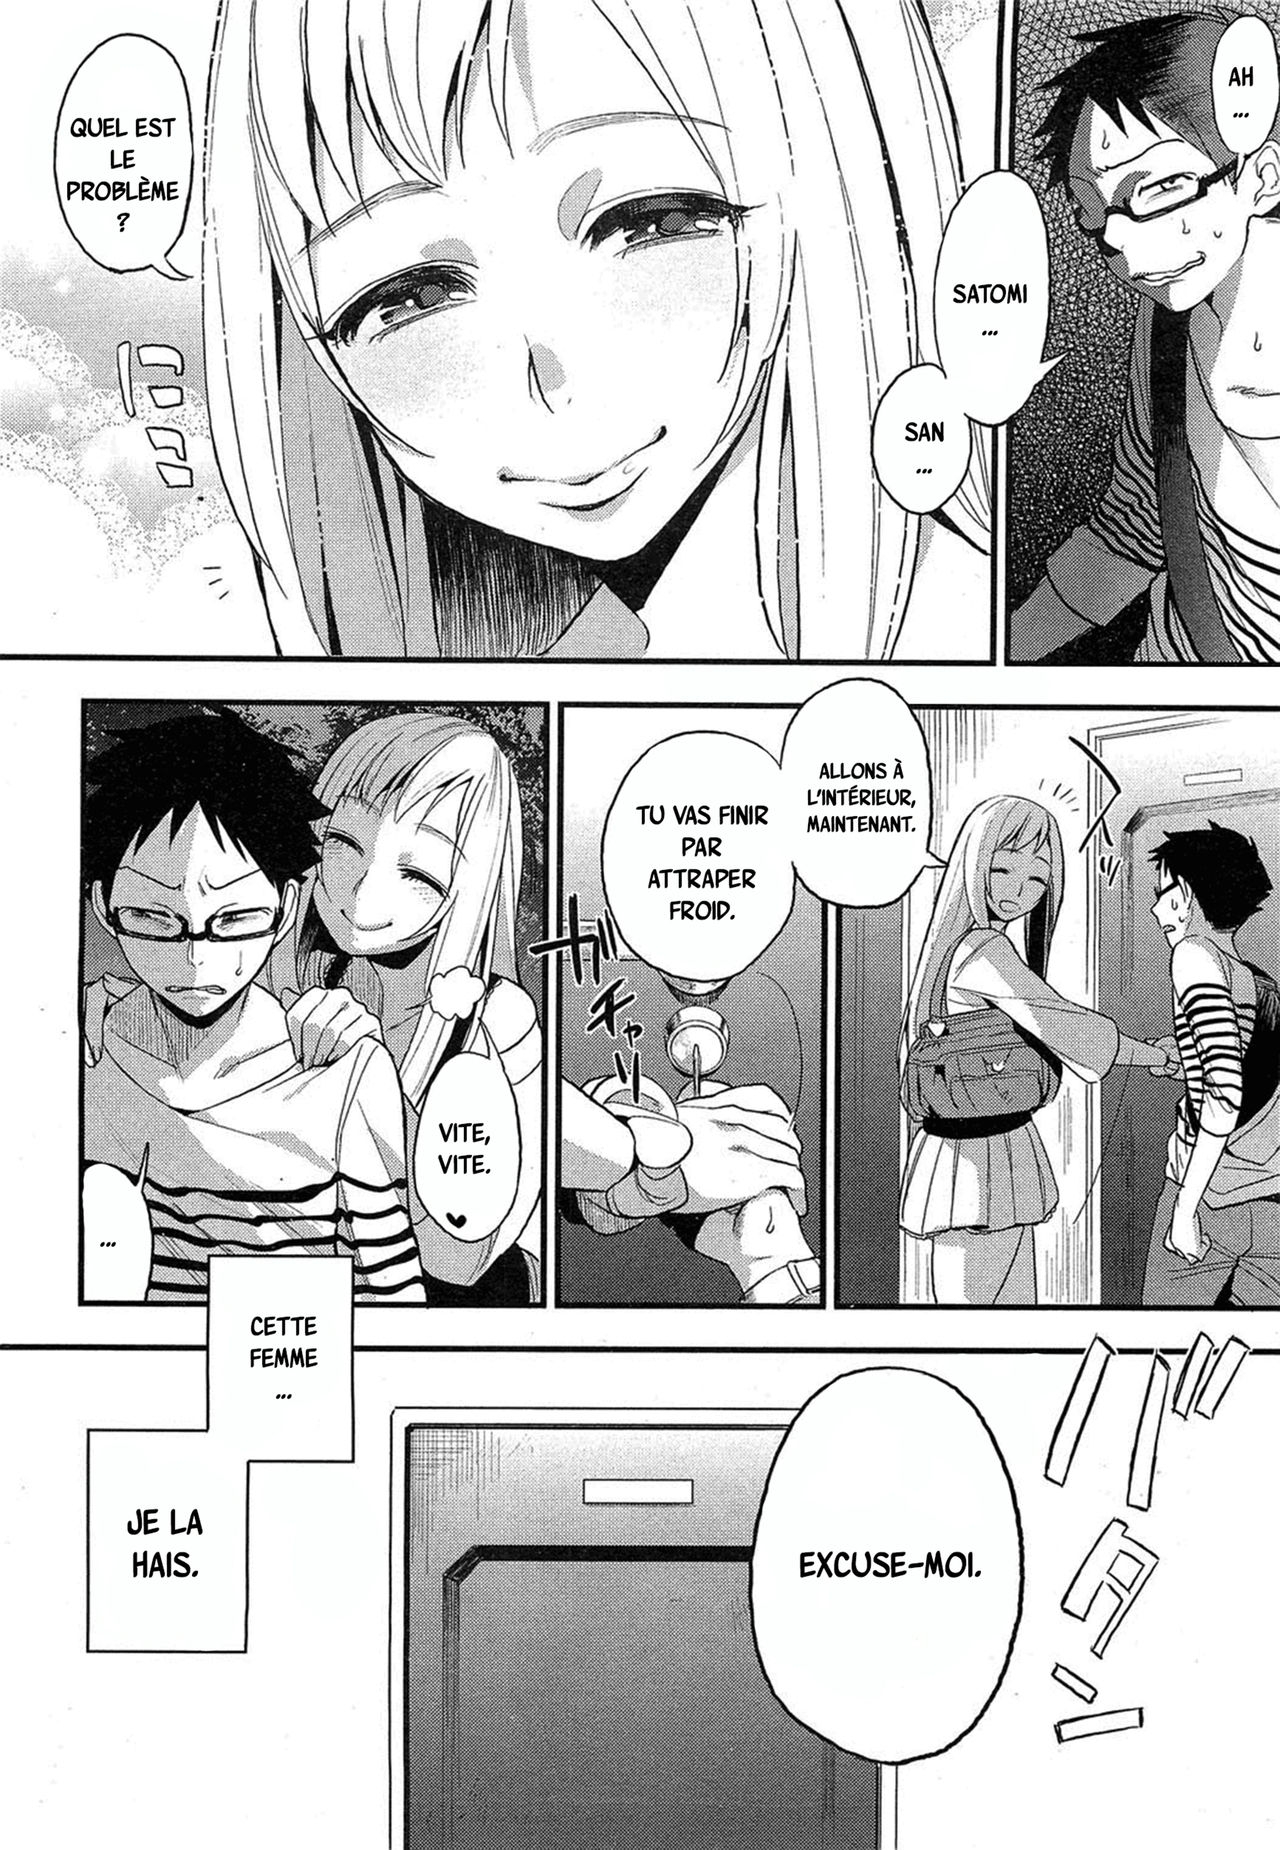 [Igumox] Omocha-kun to Onee-san | A Young Lady And Her Little Toy (COMIC HOTMiLK 2012-12) [French] 1